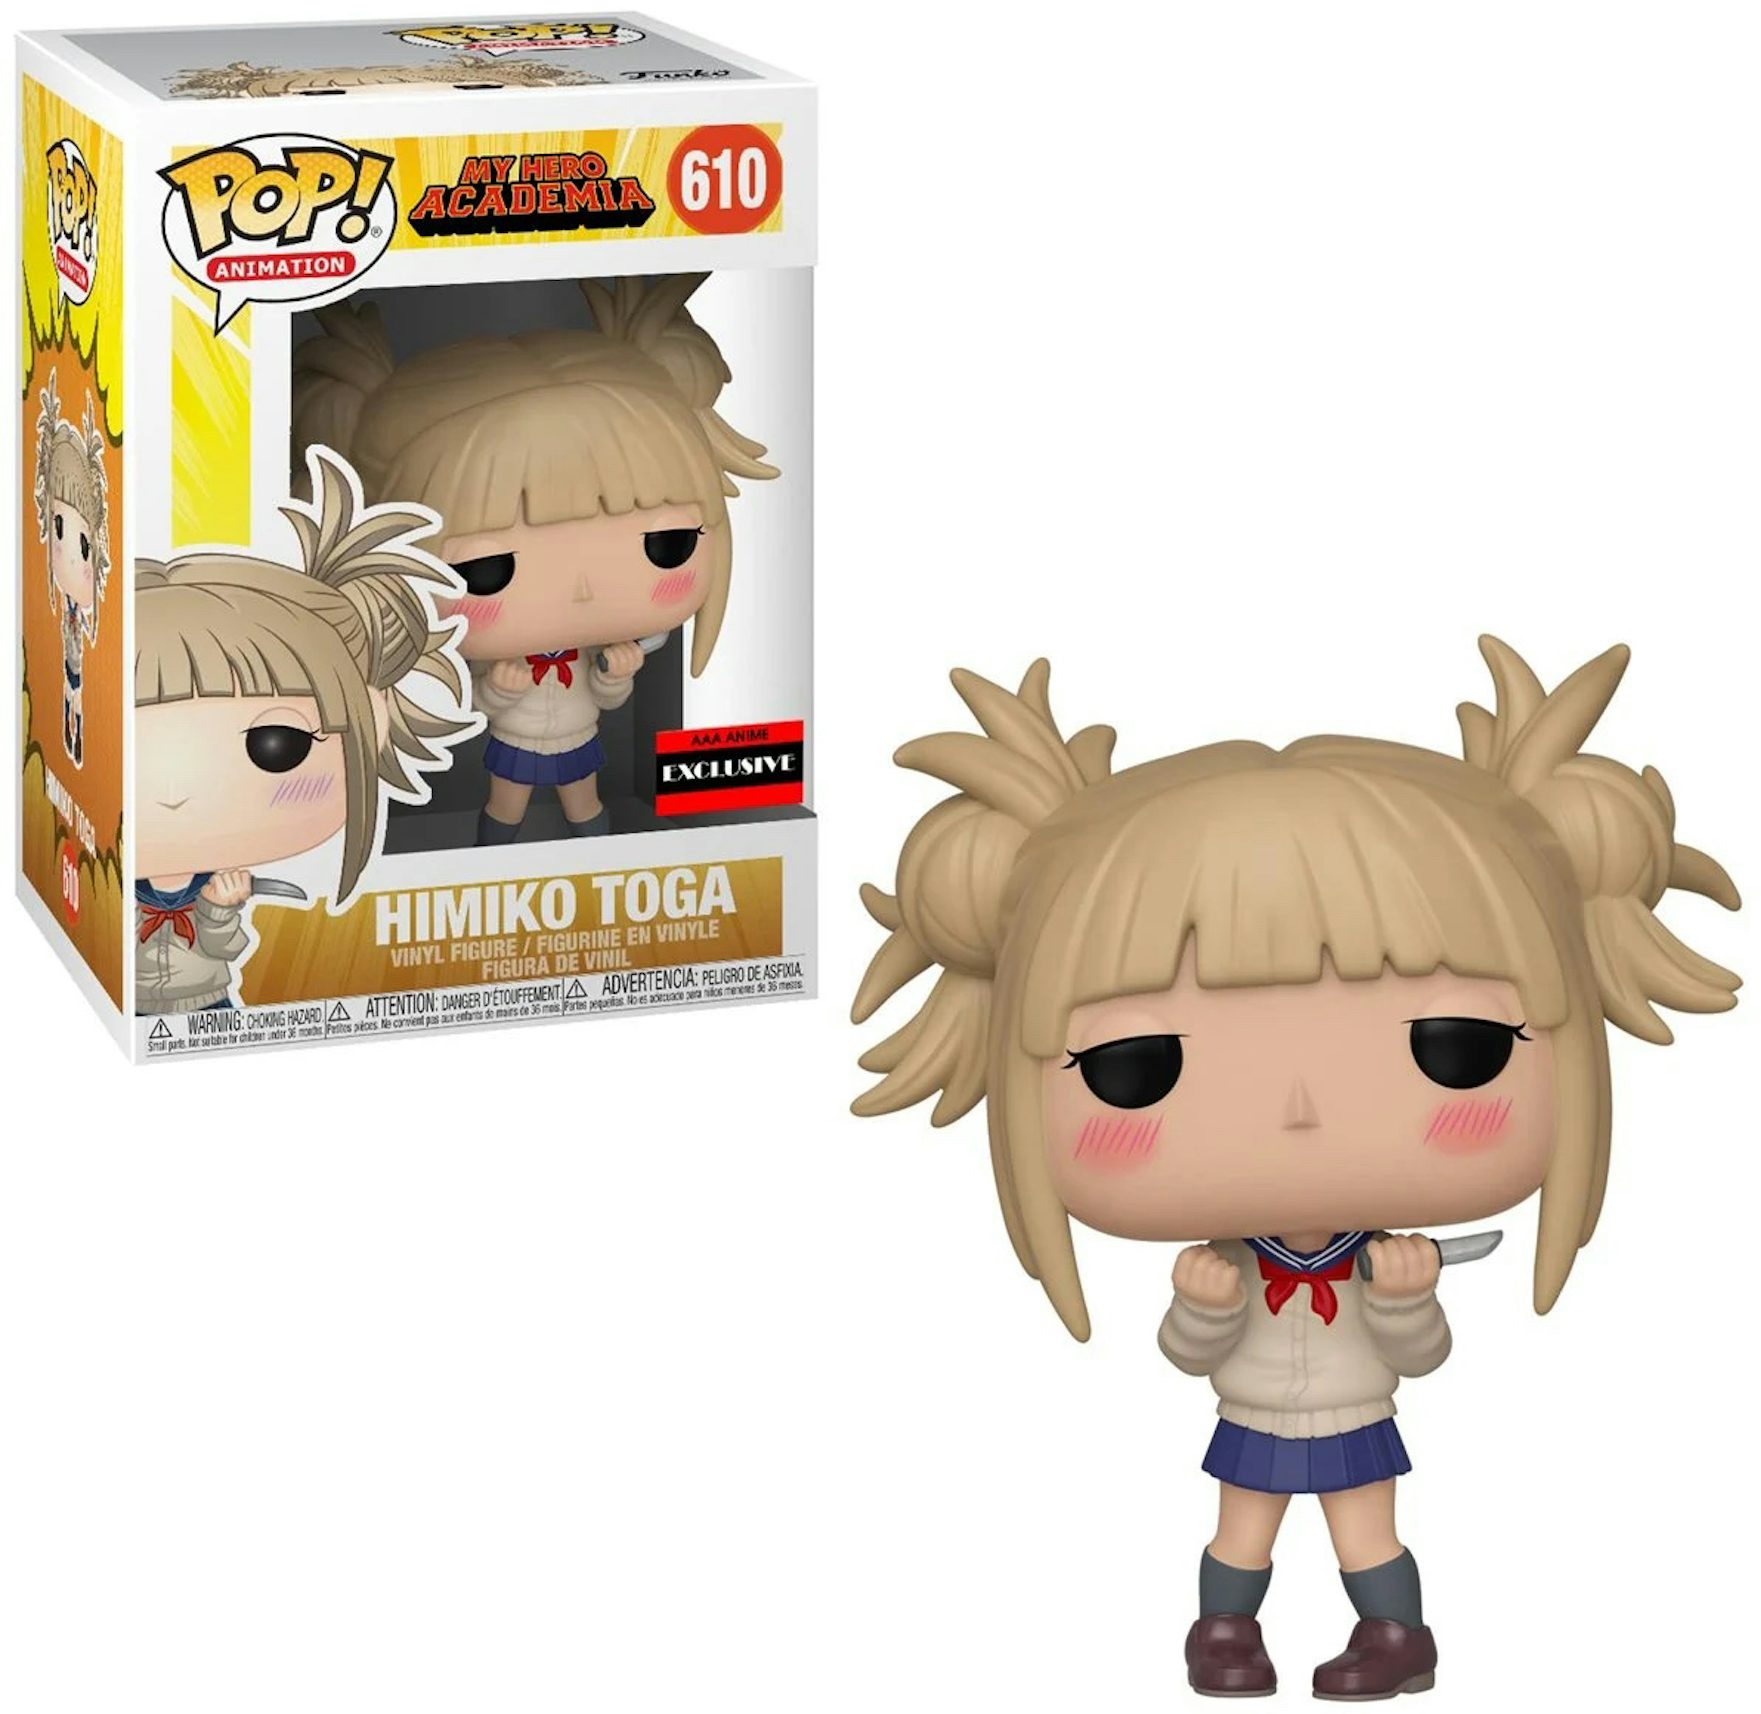 Anime & Manga: Funko Pop Figures & Other Collectibles